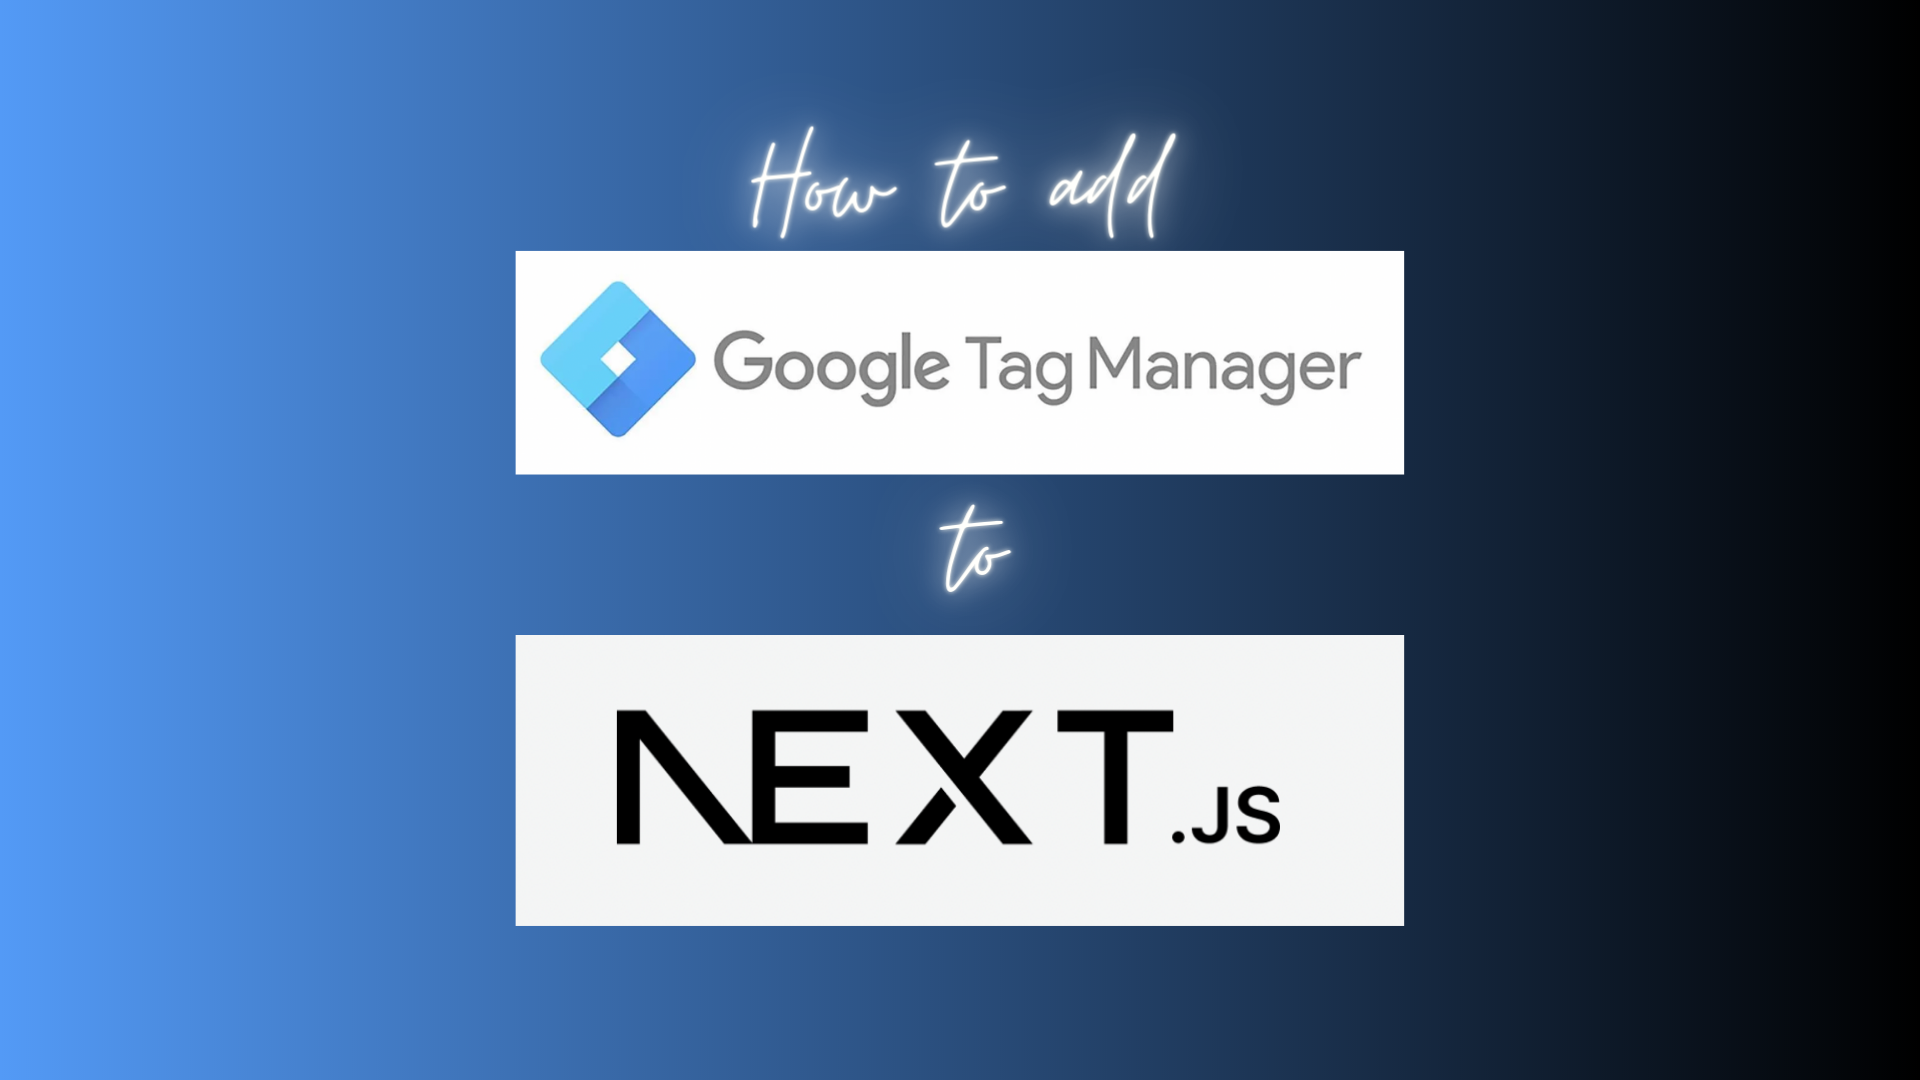 How to add Google Tag Manager to Next.js on blended blue and black background, with logos. 